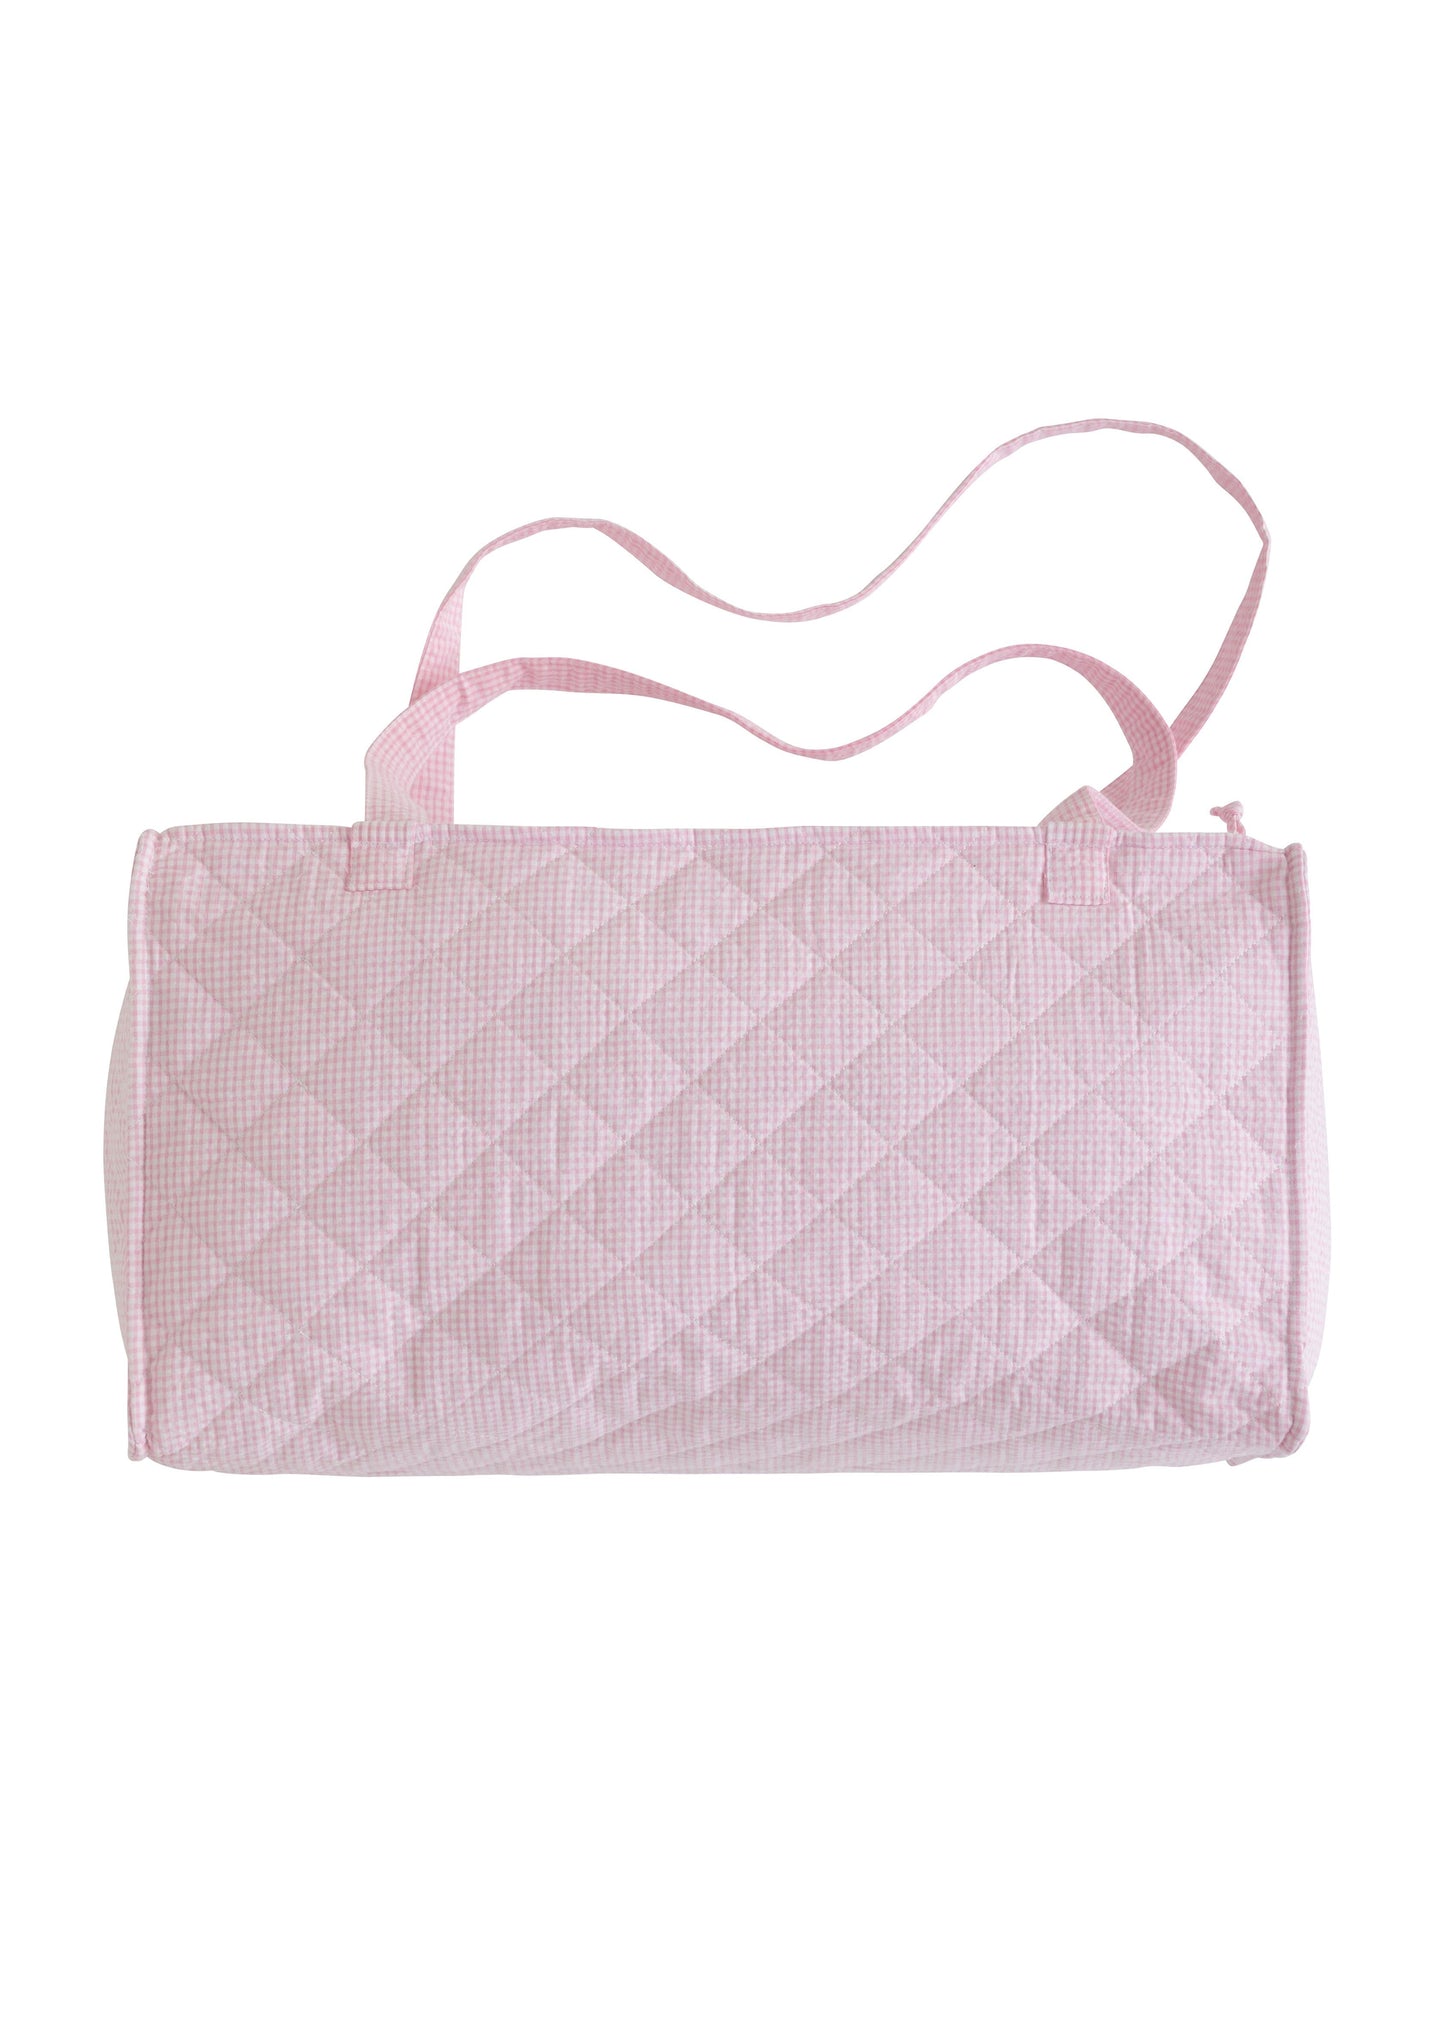 Little English Quilted Luggage - Light Pink Duffel Bag